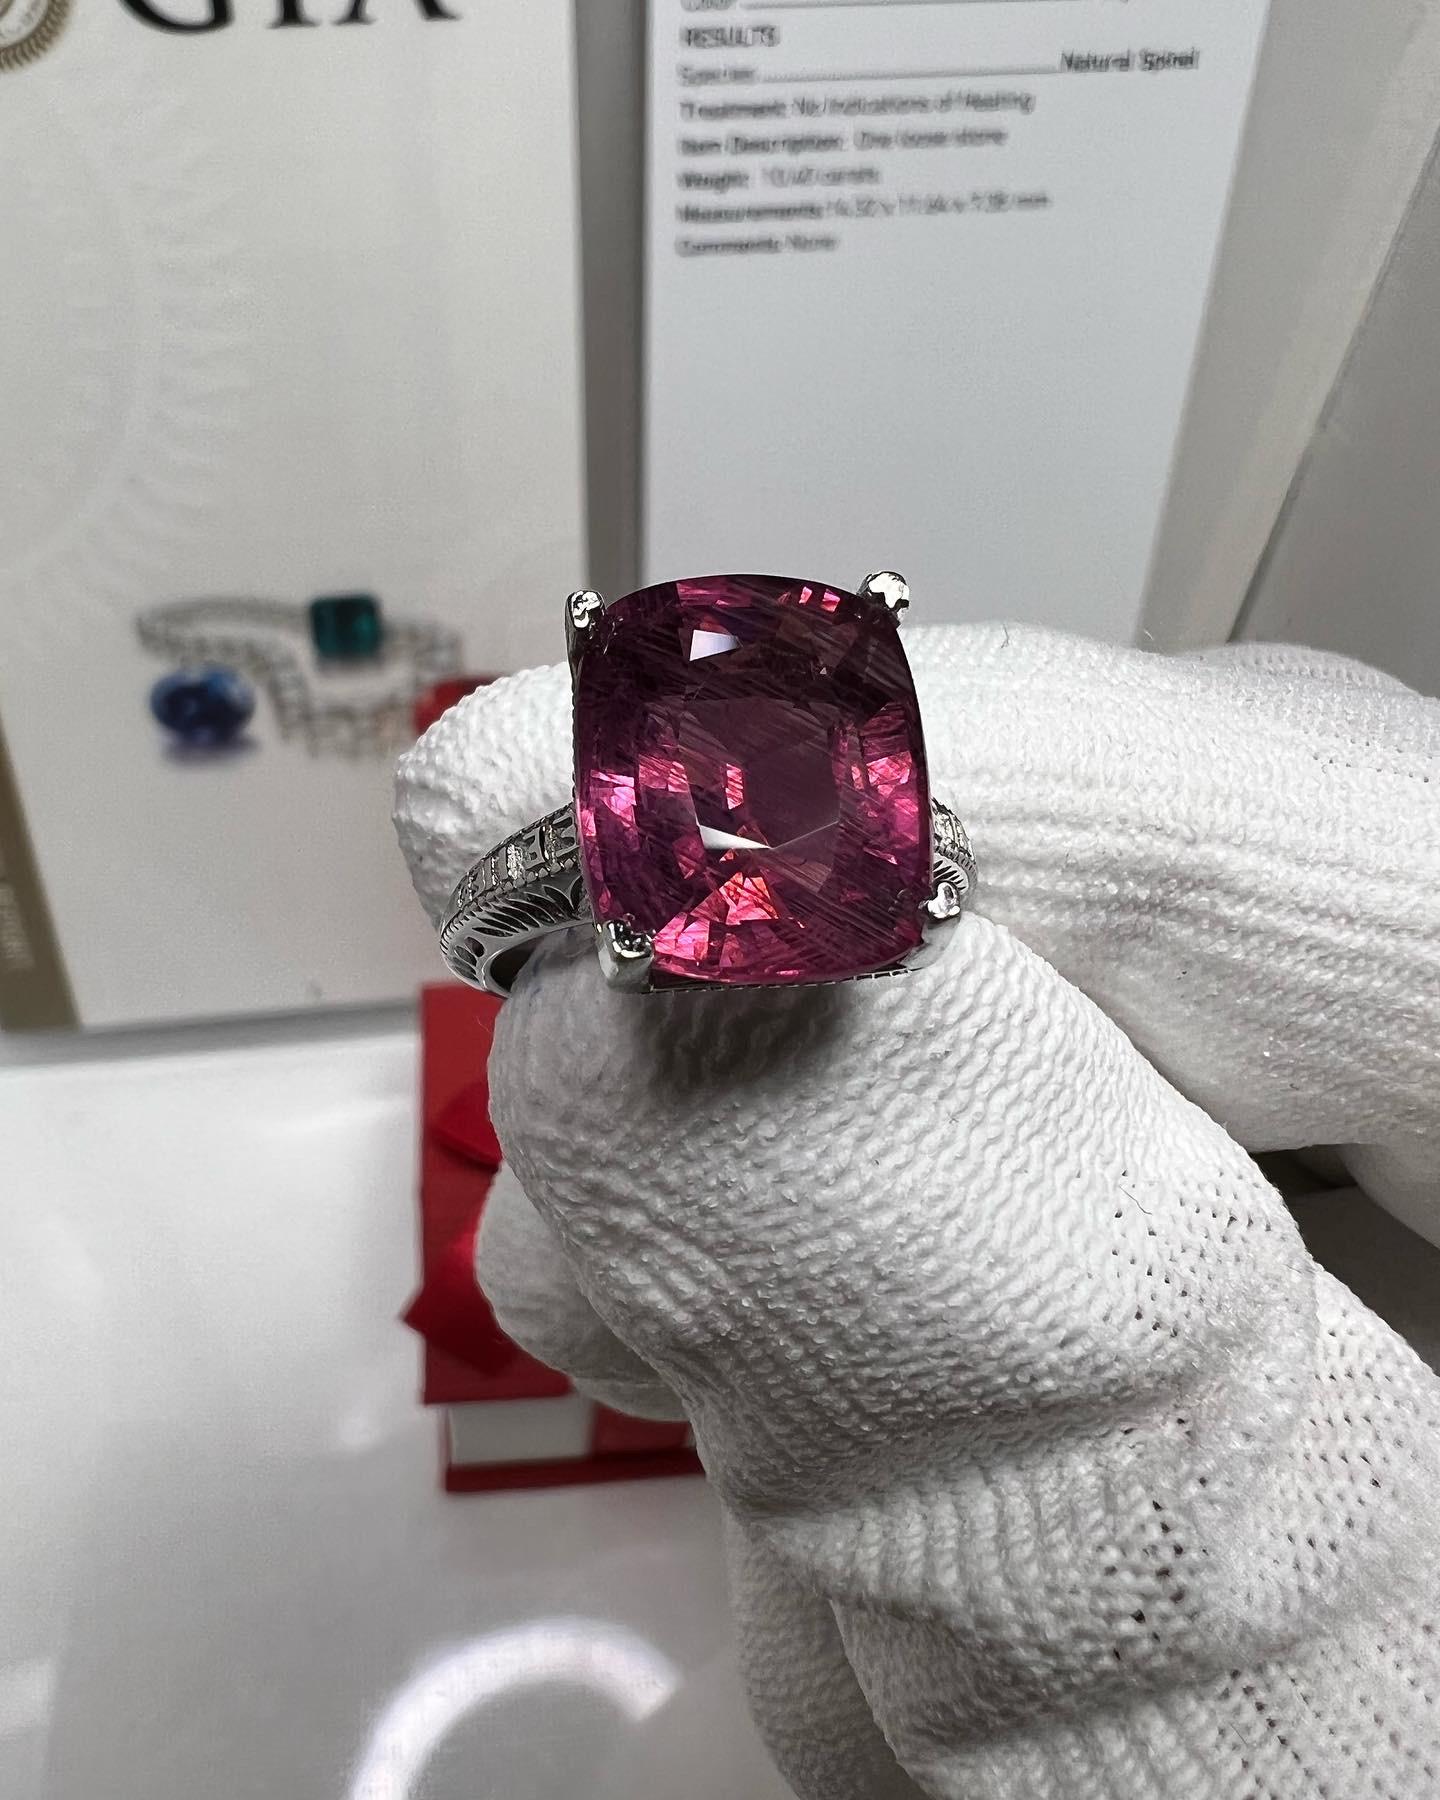 Contemporary Rare 10.4 Carat Purplish Pink Spinel Solitaire Ring, GIA Certified